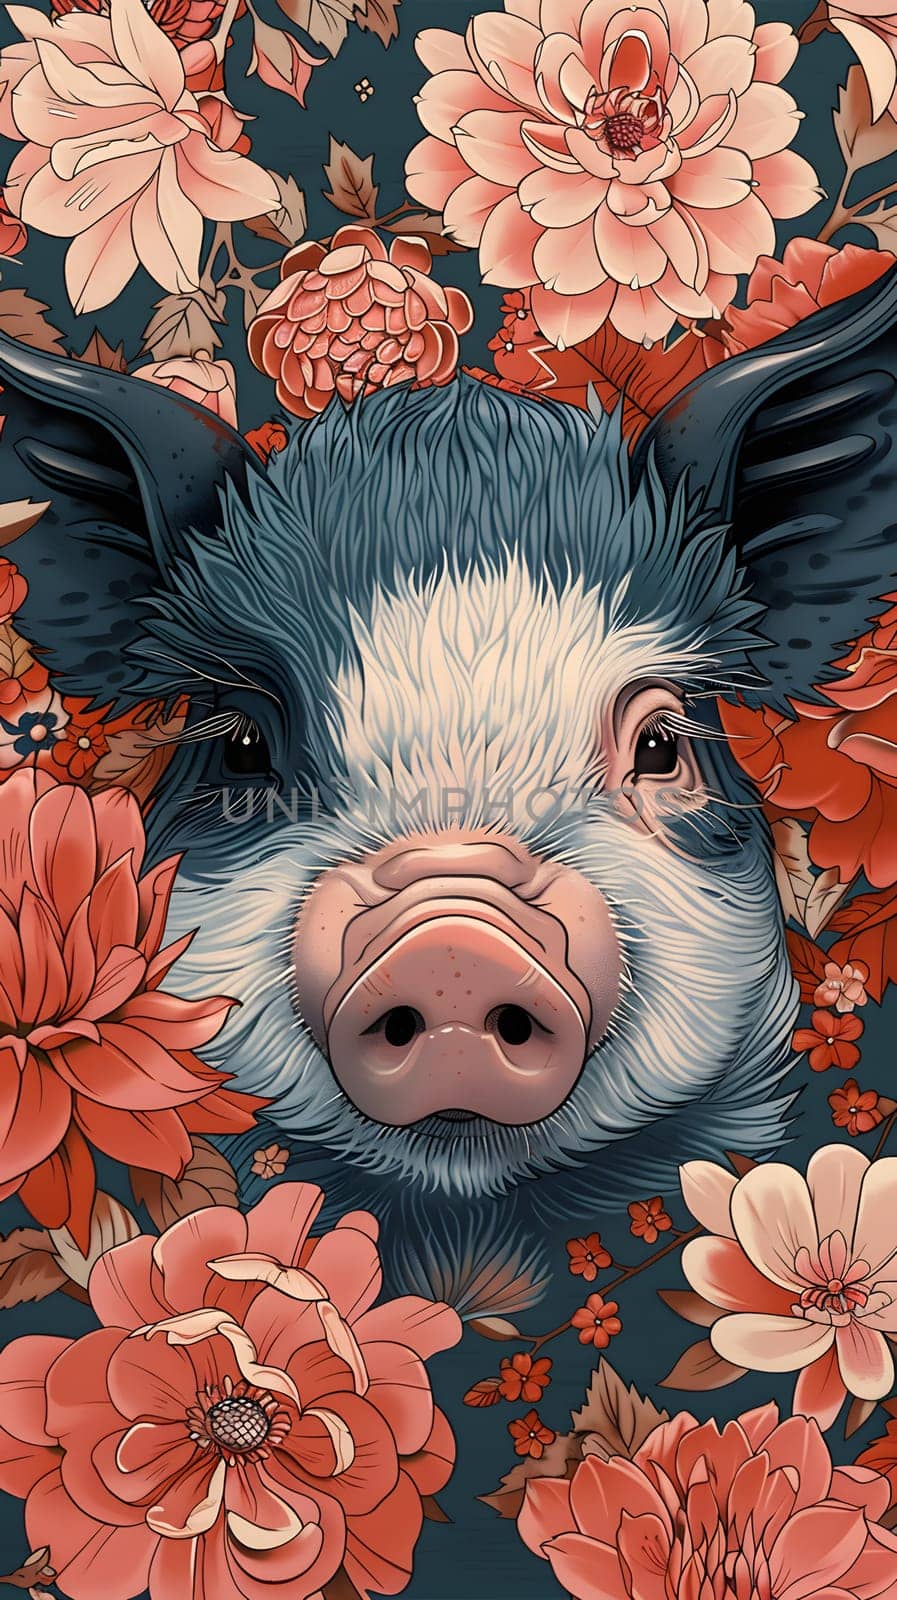 An art painting depicting a pig with a cute snout surrounded by vibrant pink flowers, blending nature and organism into a colorful pattern of petals